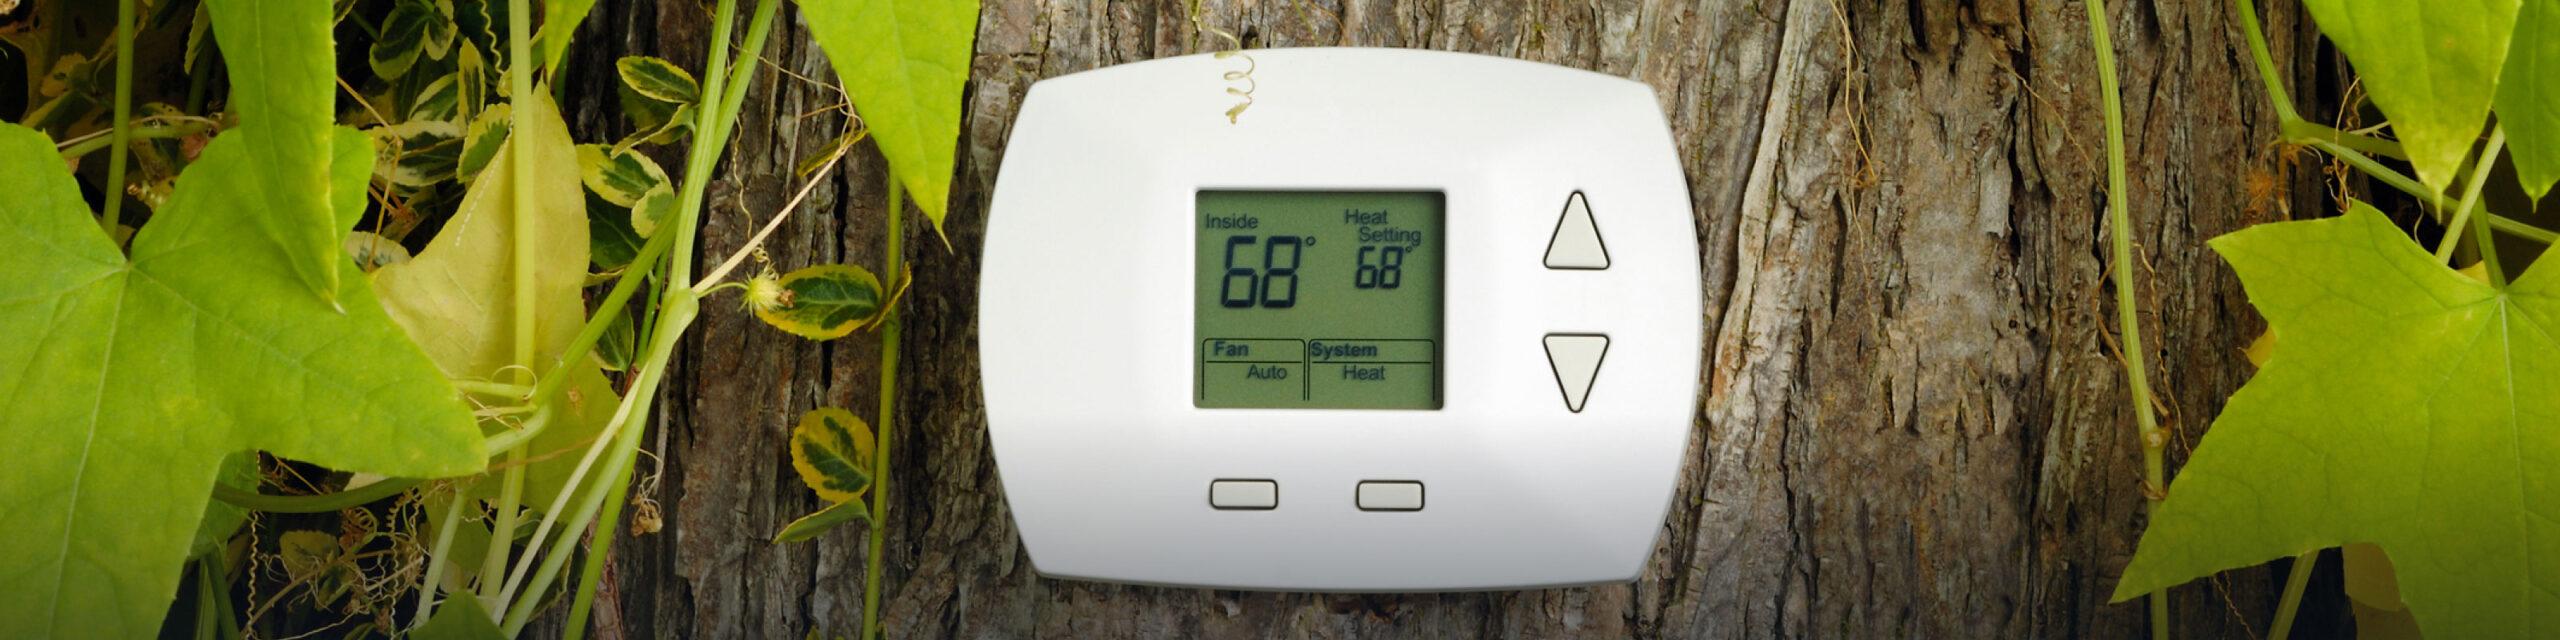 A white home thermostat is attached to a tree trunk.